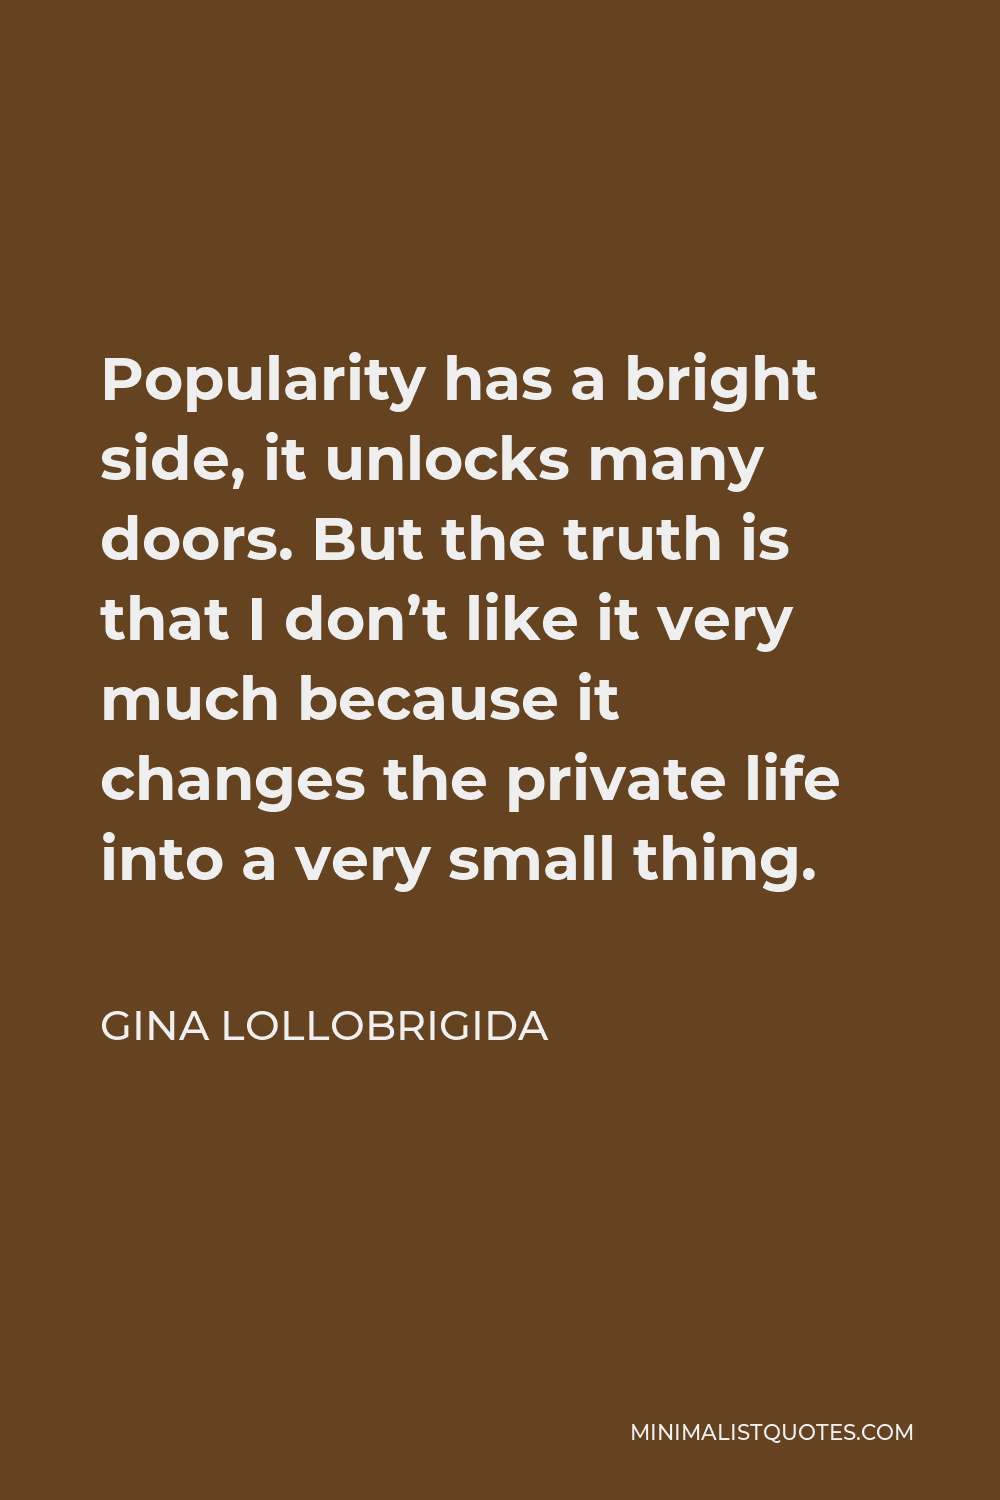 Gina Lollobrigida Quote - Popularity has a bright side, it unlocks many doors. But the truth is that I don’t like it very much because it changes the private life into a very small thing.